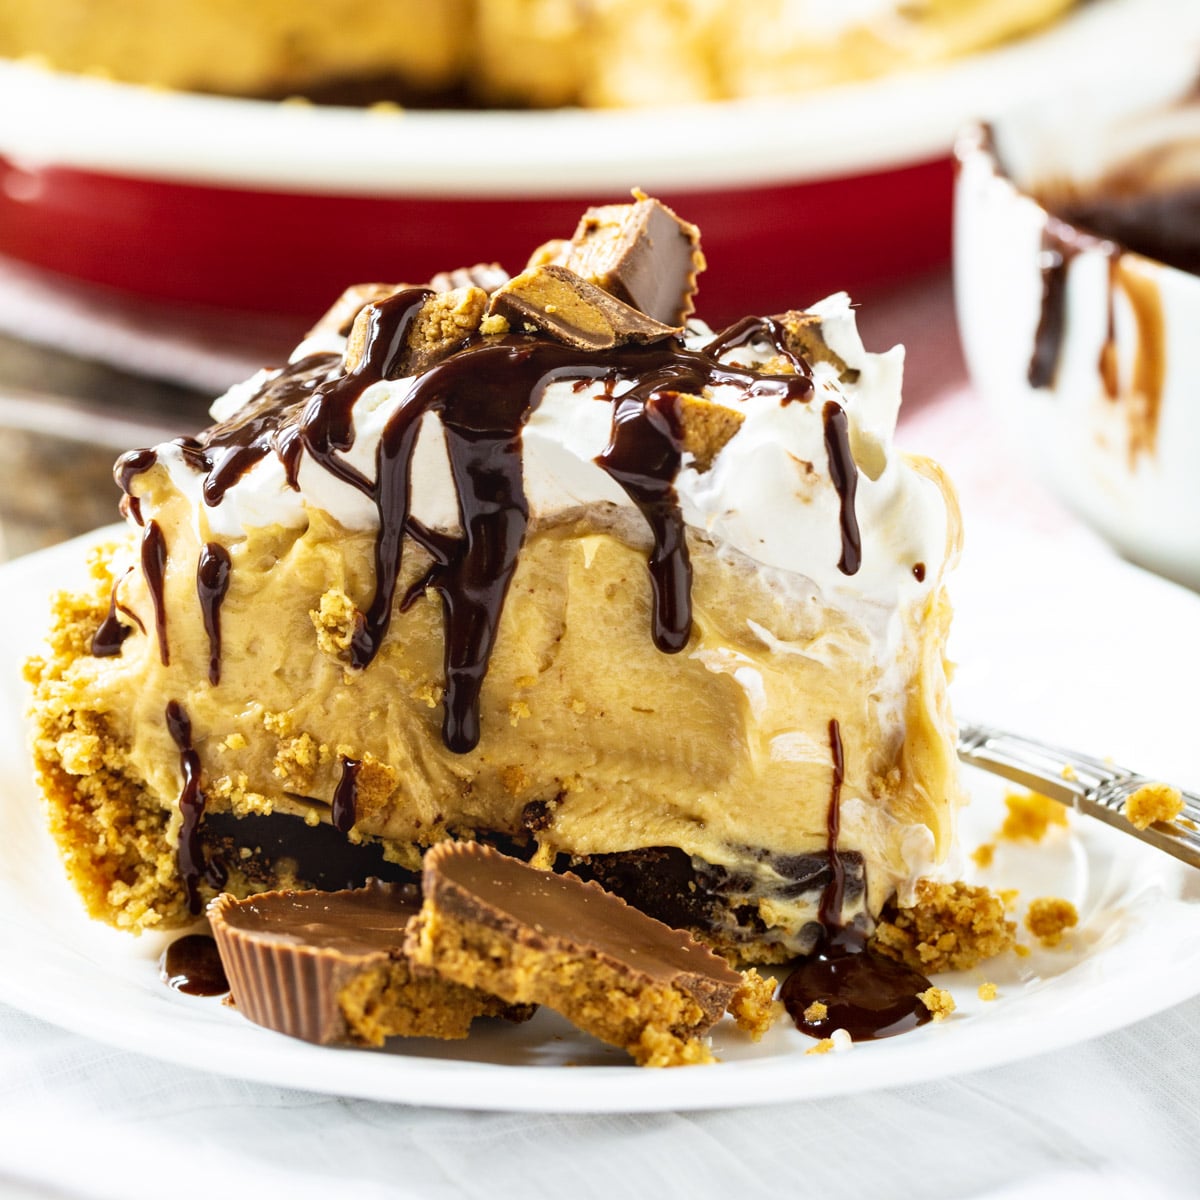 Slice of Peanut Butter Pie on a plate with peanut butter cups.